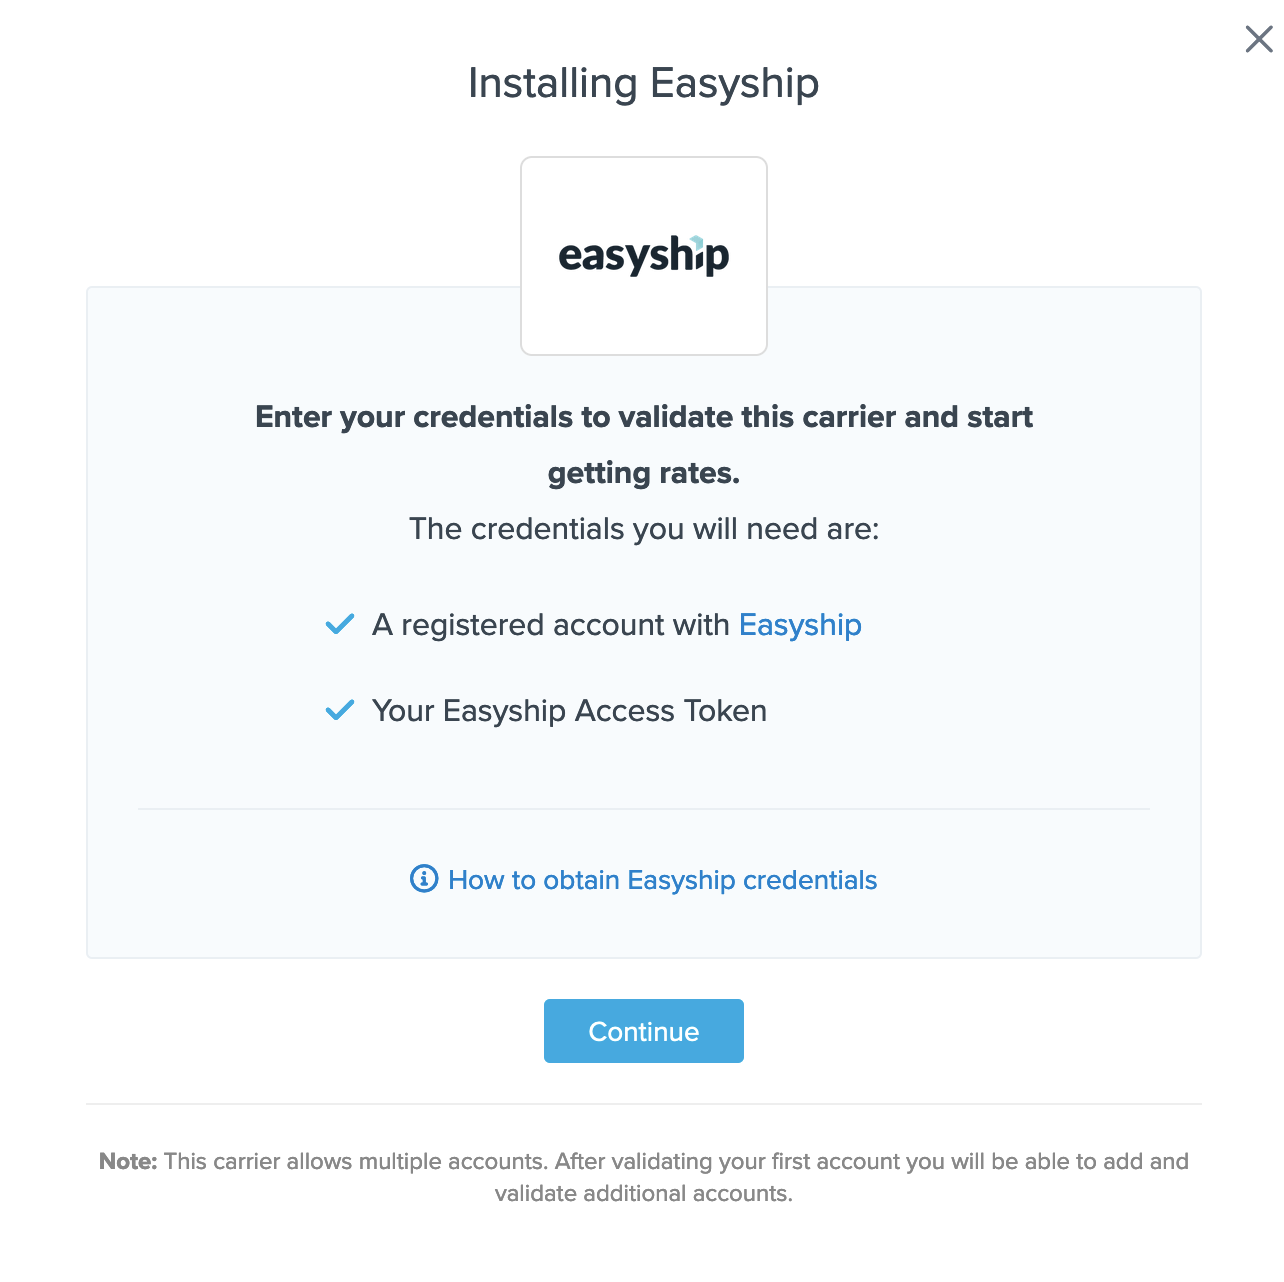 Continue to complete Easyship setup in ShipperHQ